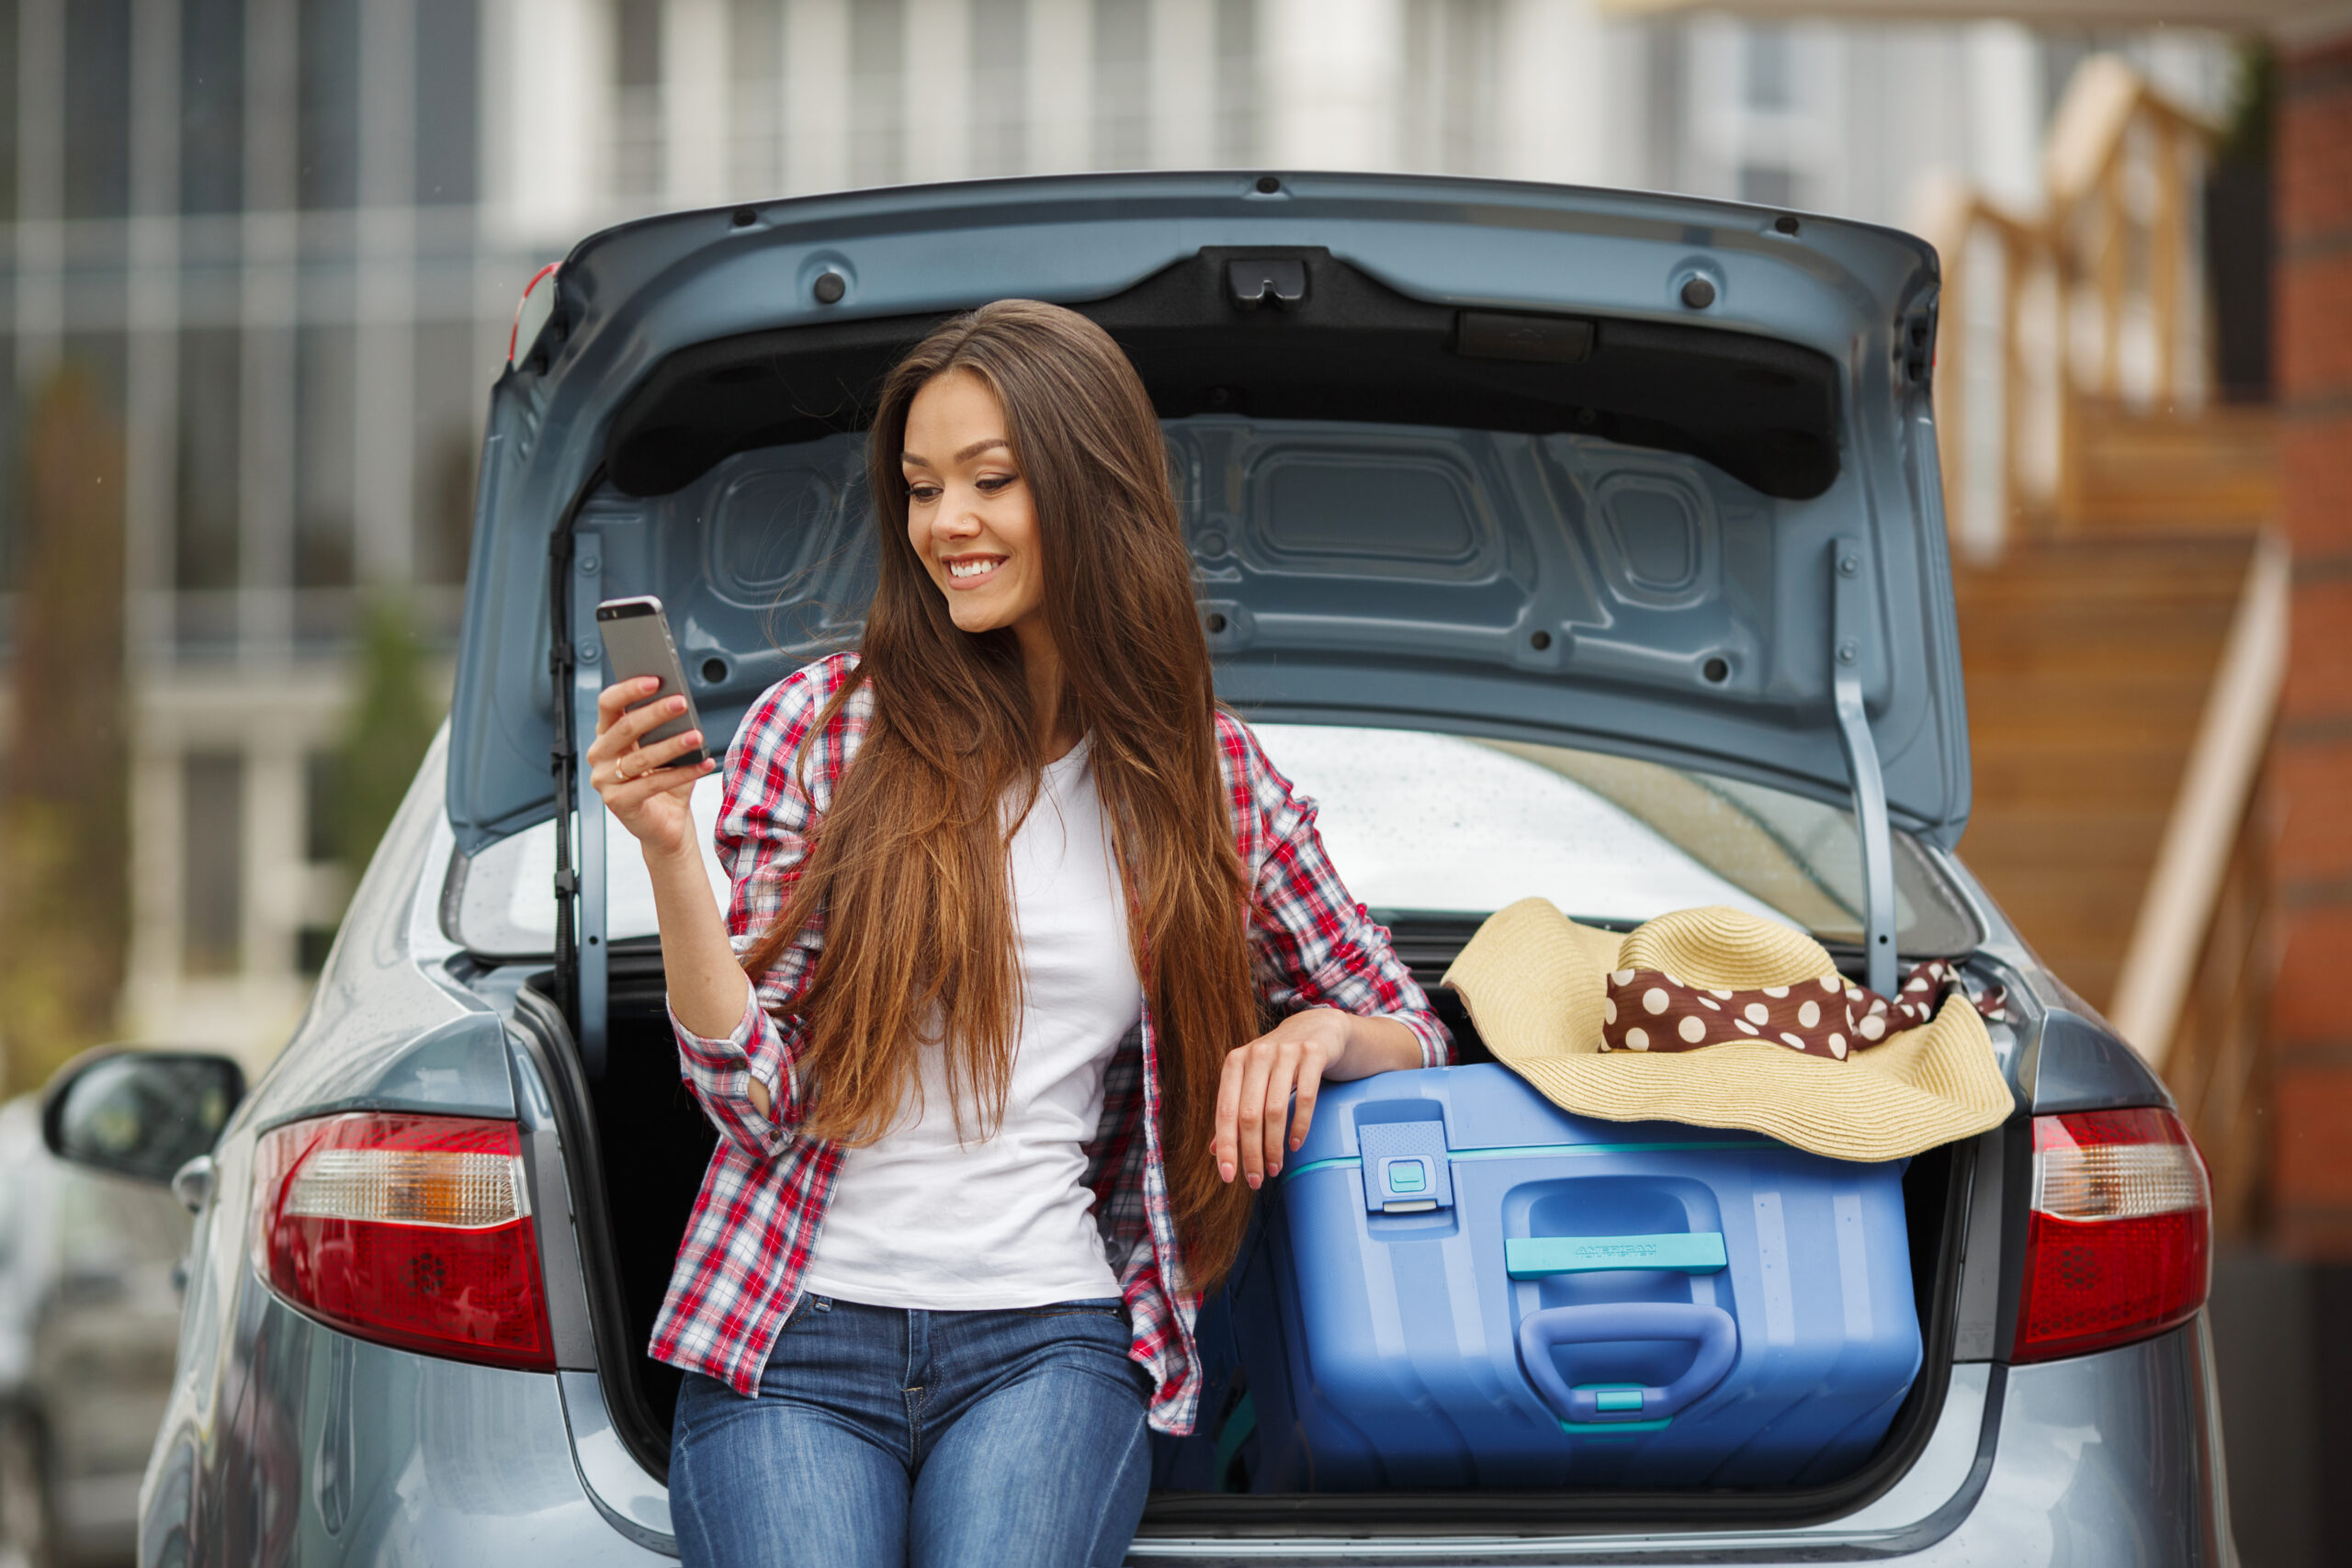 What to Look for in an Affordable College Car